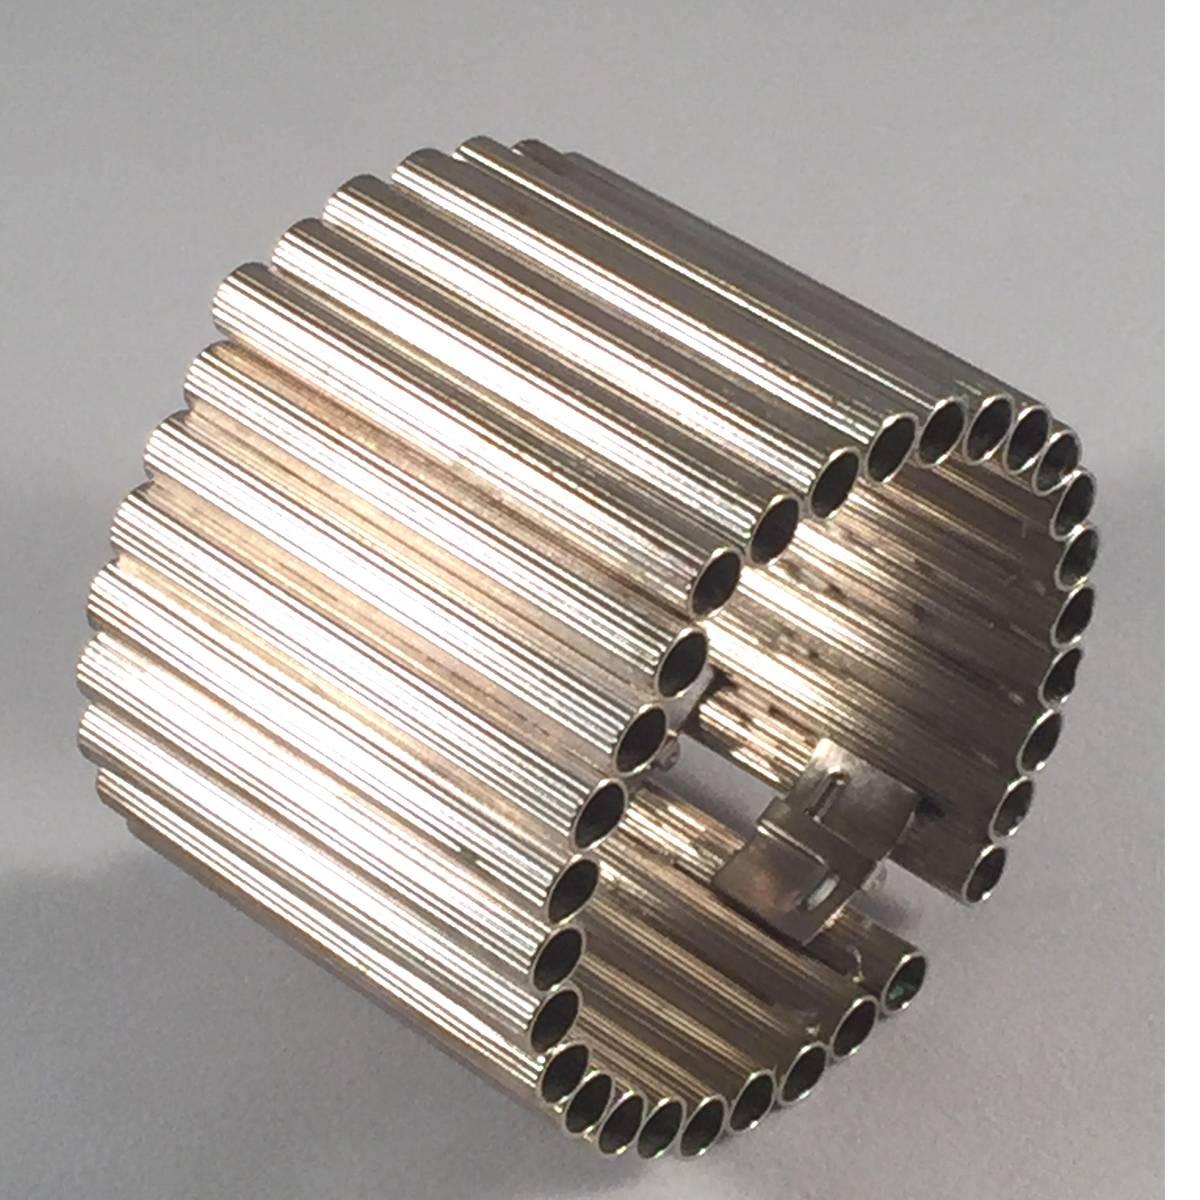 Modern and industrial is a tone not normally asssociated with master jewelry designer William deLillo, but this 1970s William deLillo Silvertone Tubular Modernist Hinged Bracelet is the exception to that rule. A master of many modes and mediums,